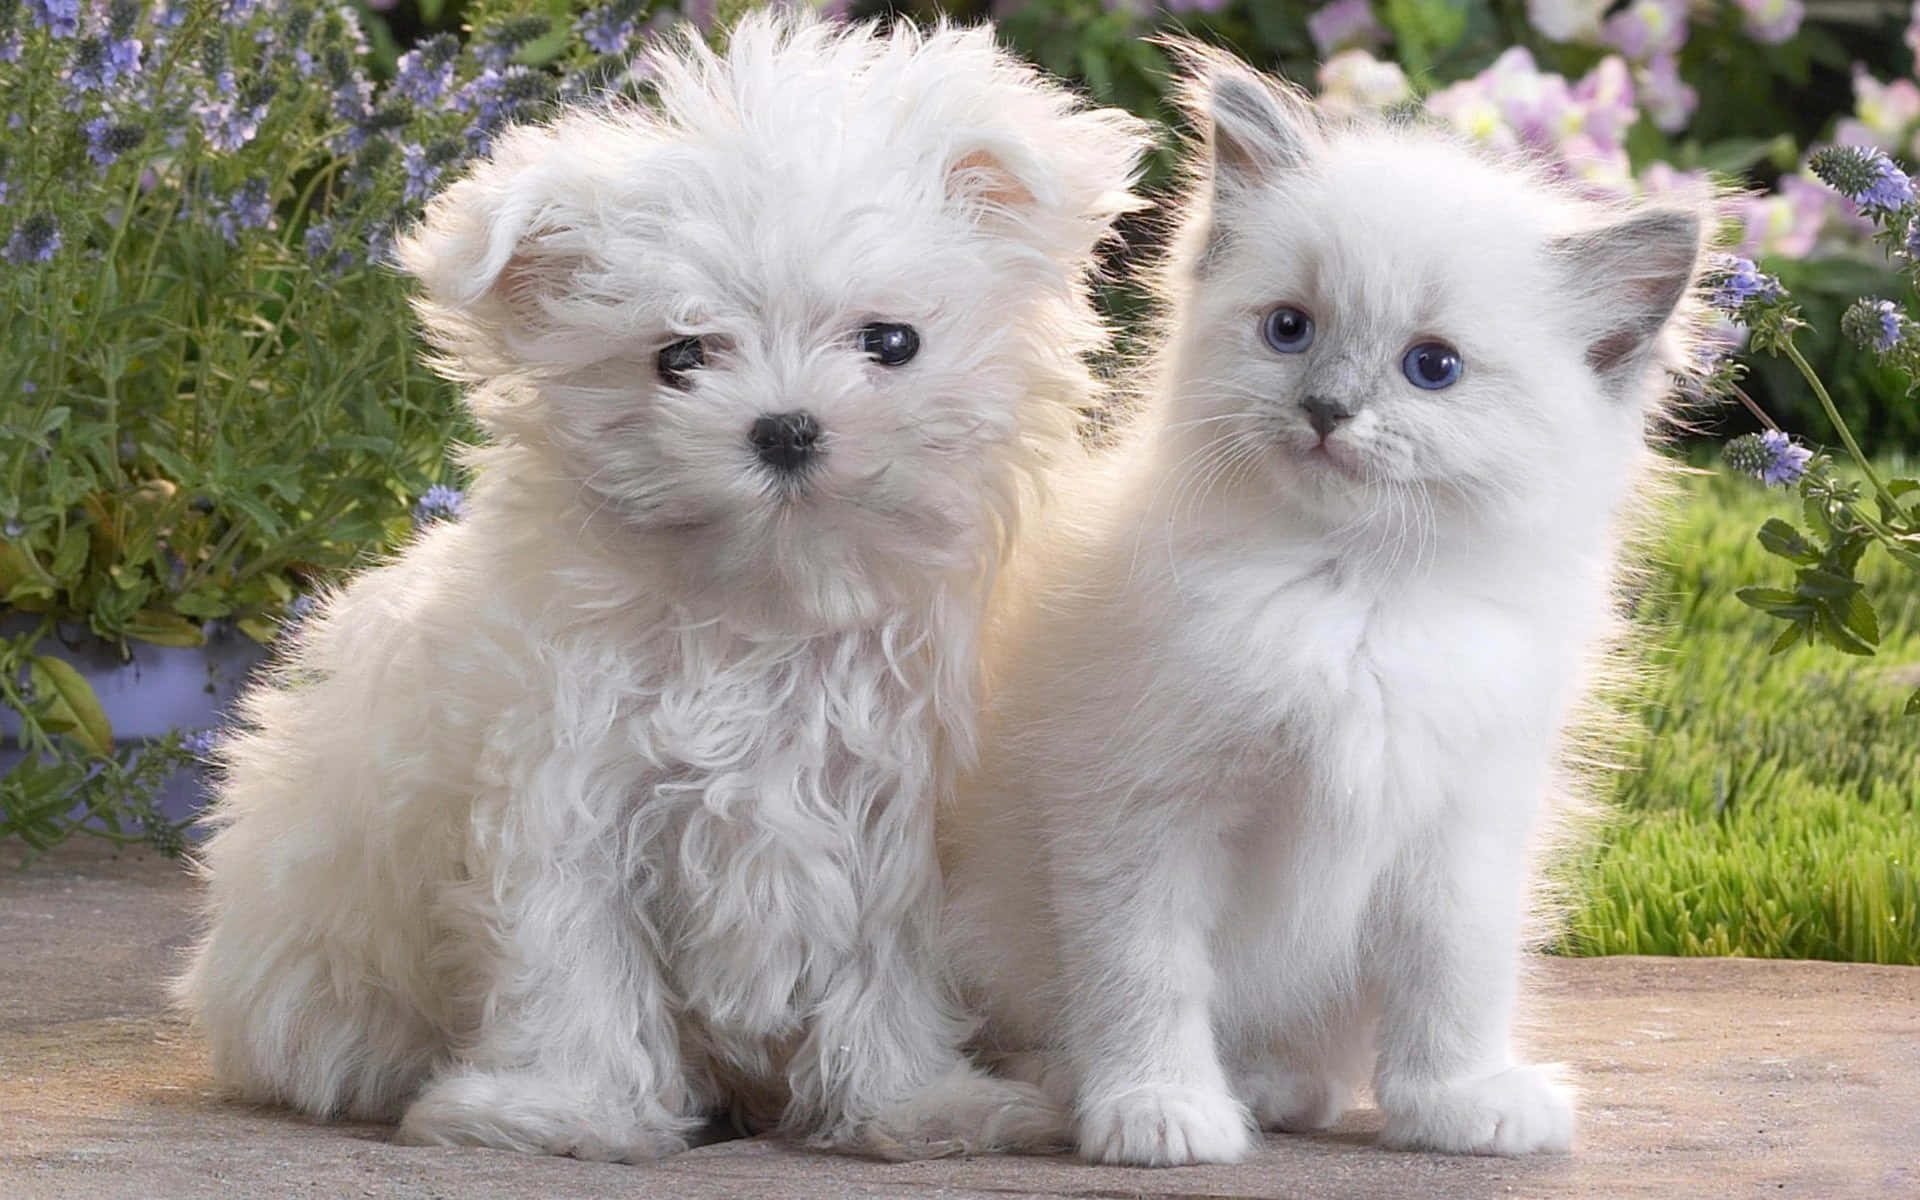 A fluffy kitten and cuddly puppy cuddle together in a sunny meadow. Wallpaper